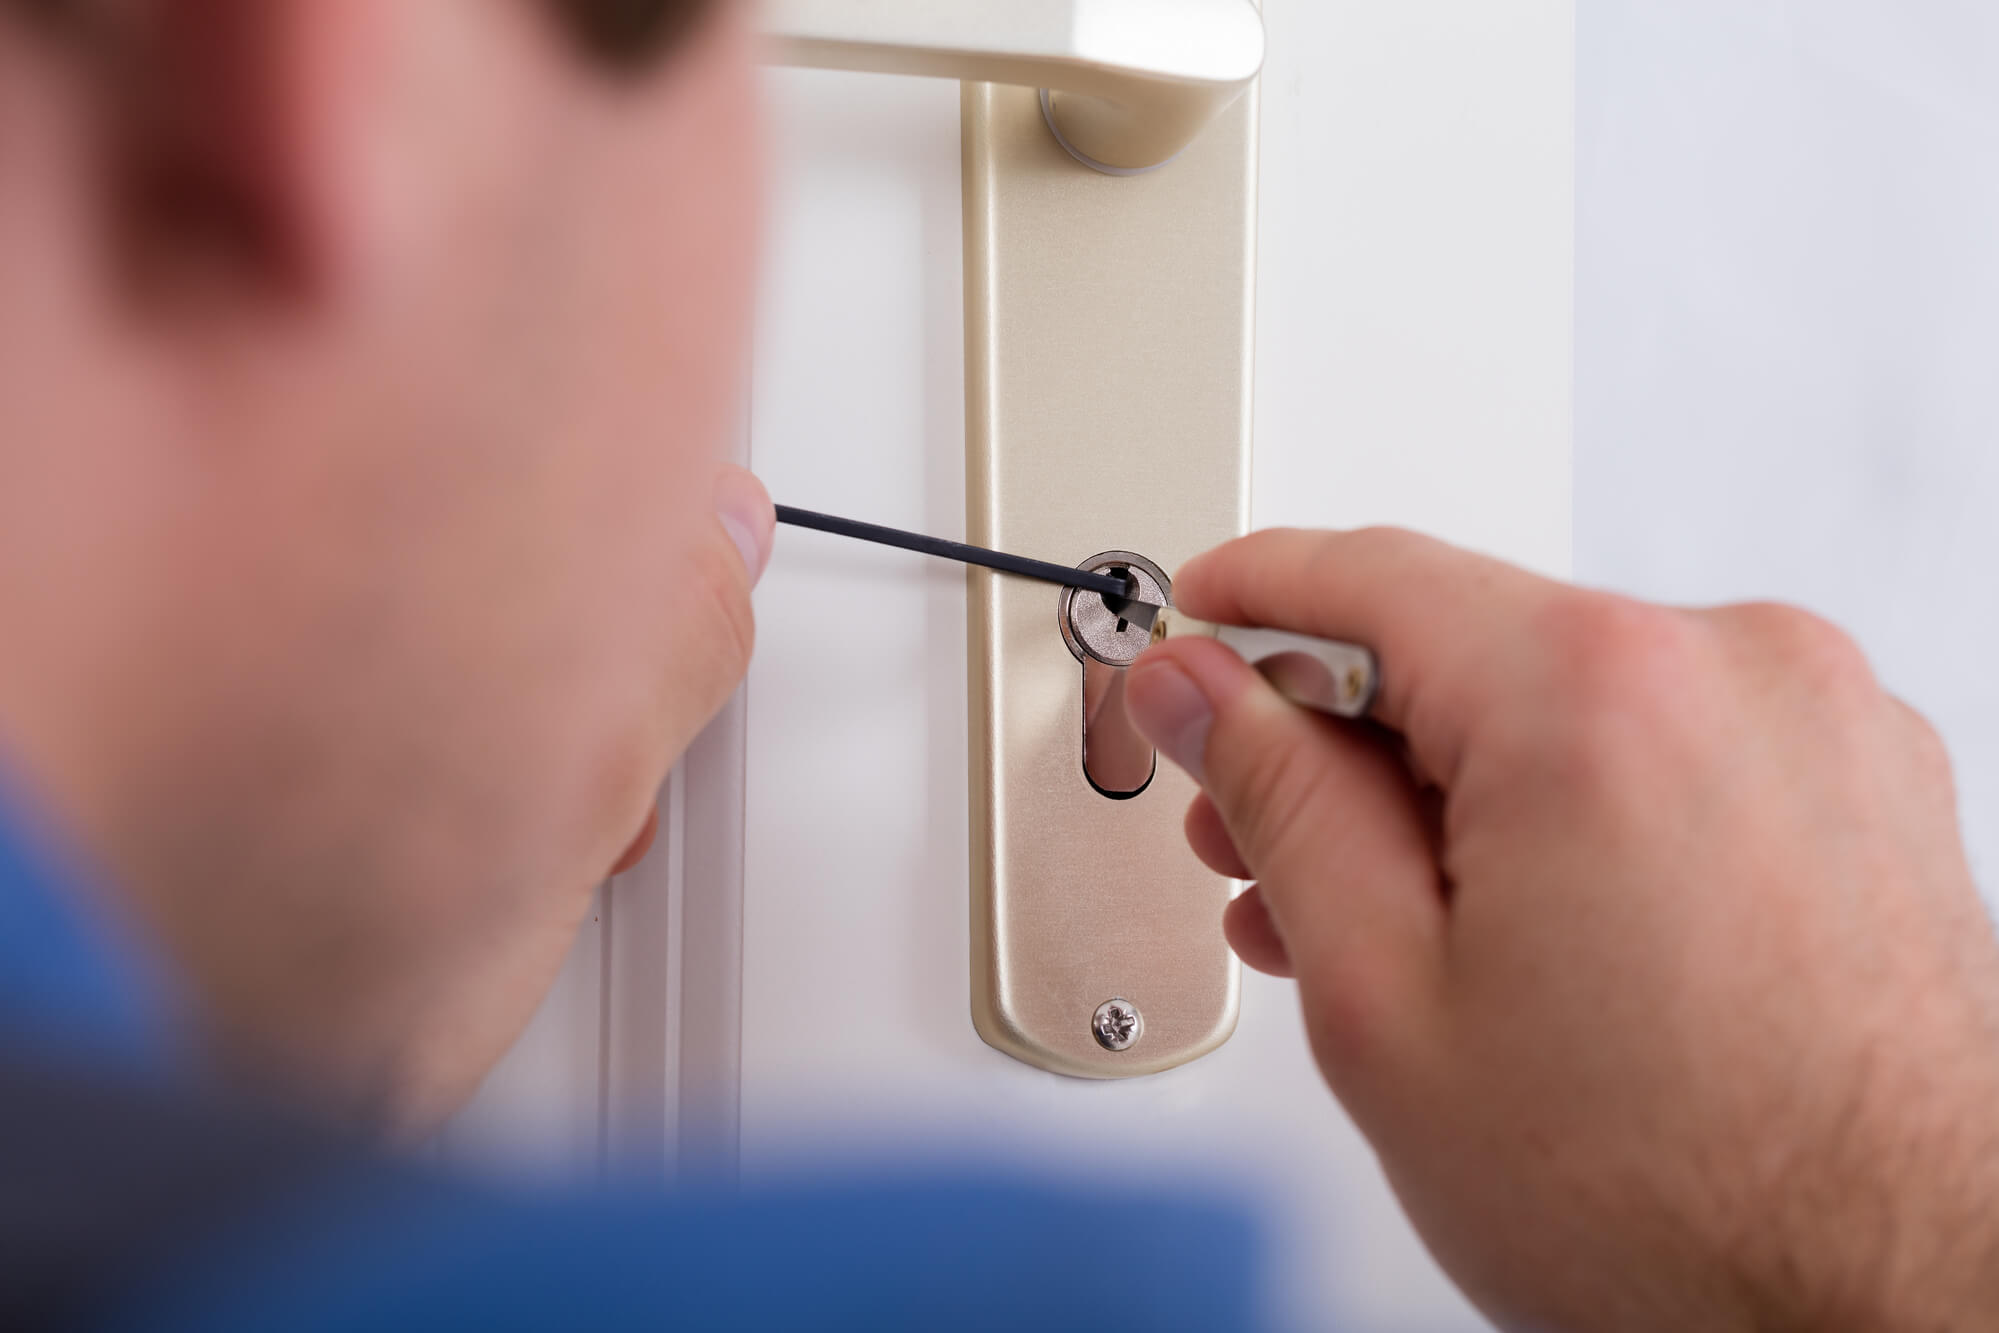 Master Key System at Home - Pros and Cons